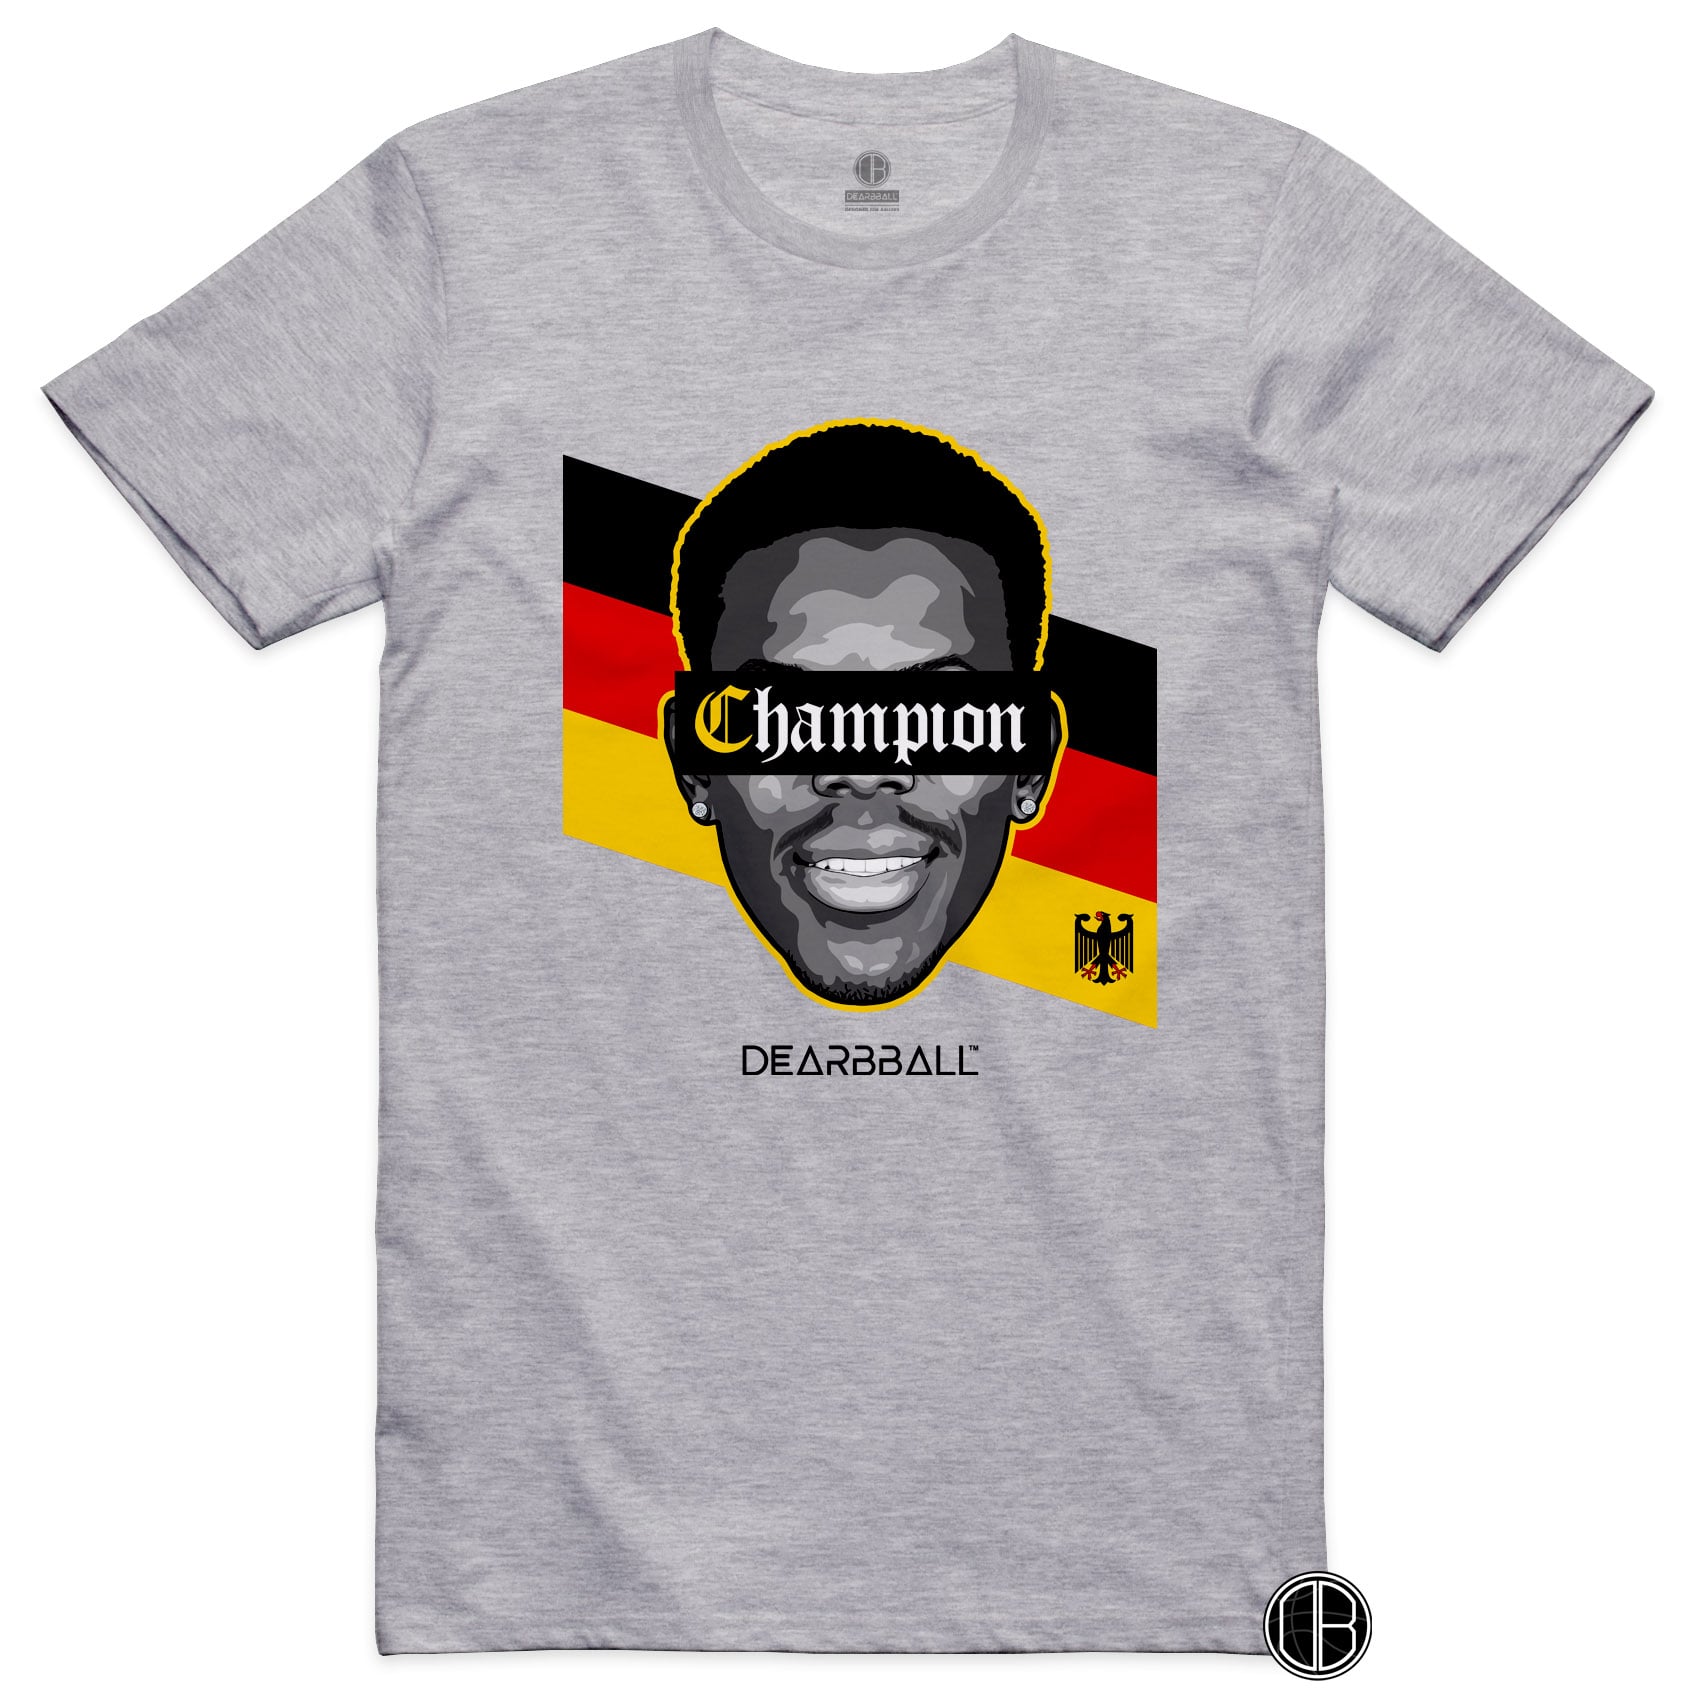 DearBBall T-Shirt - CHAMPION Germany Edition